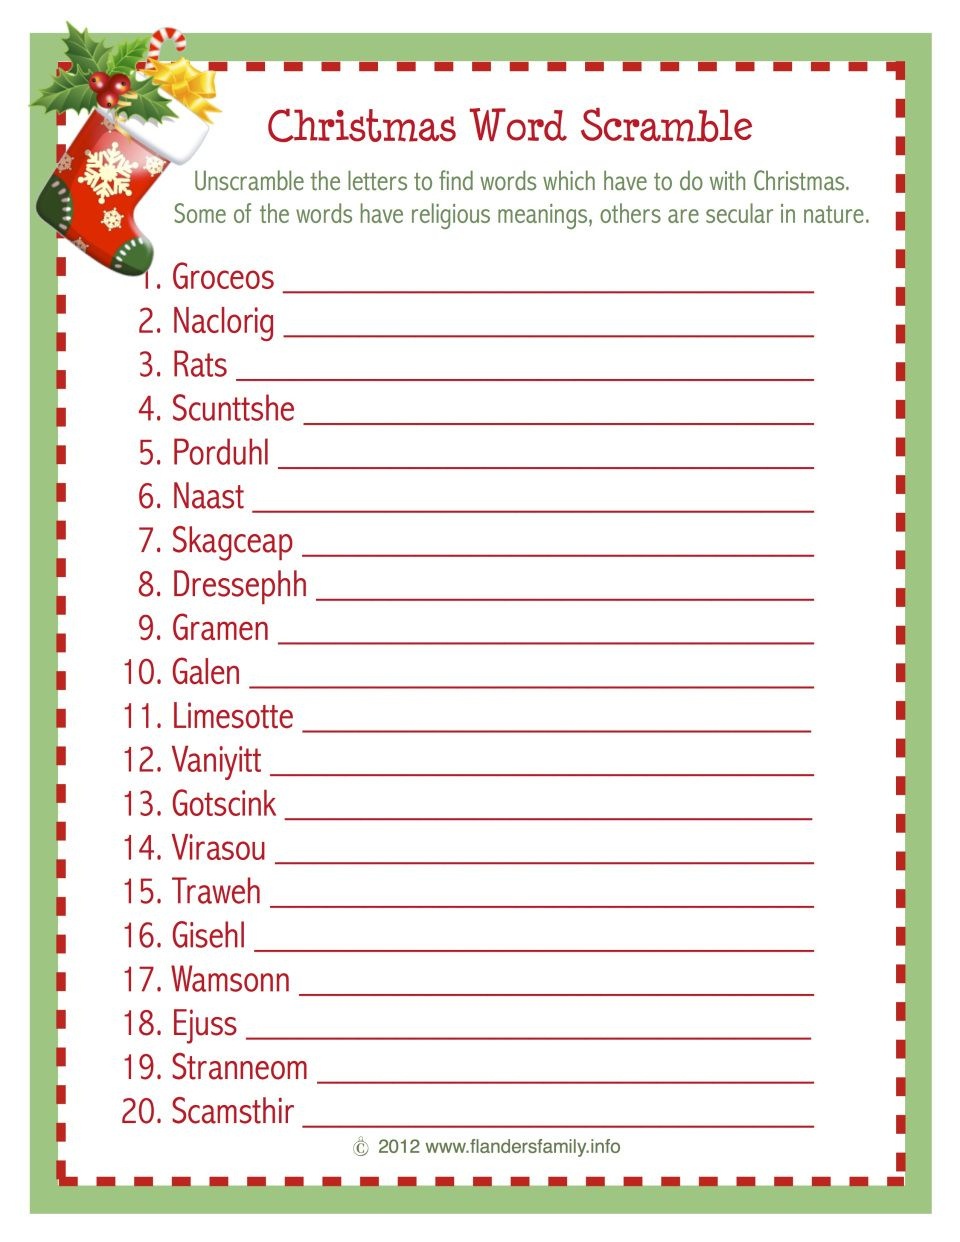 8 Games For Your Christmas Celebration | Christmas Party Games - Free Printable Religious Christmas Games